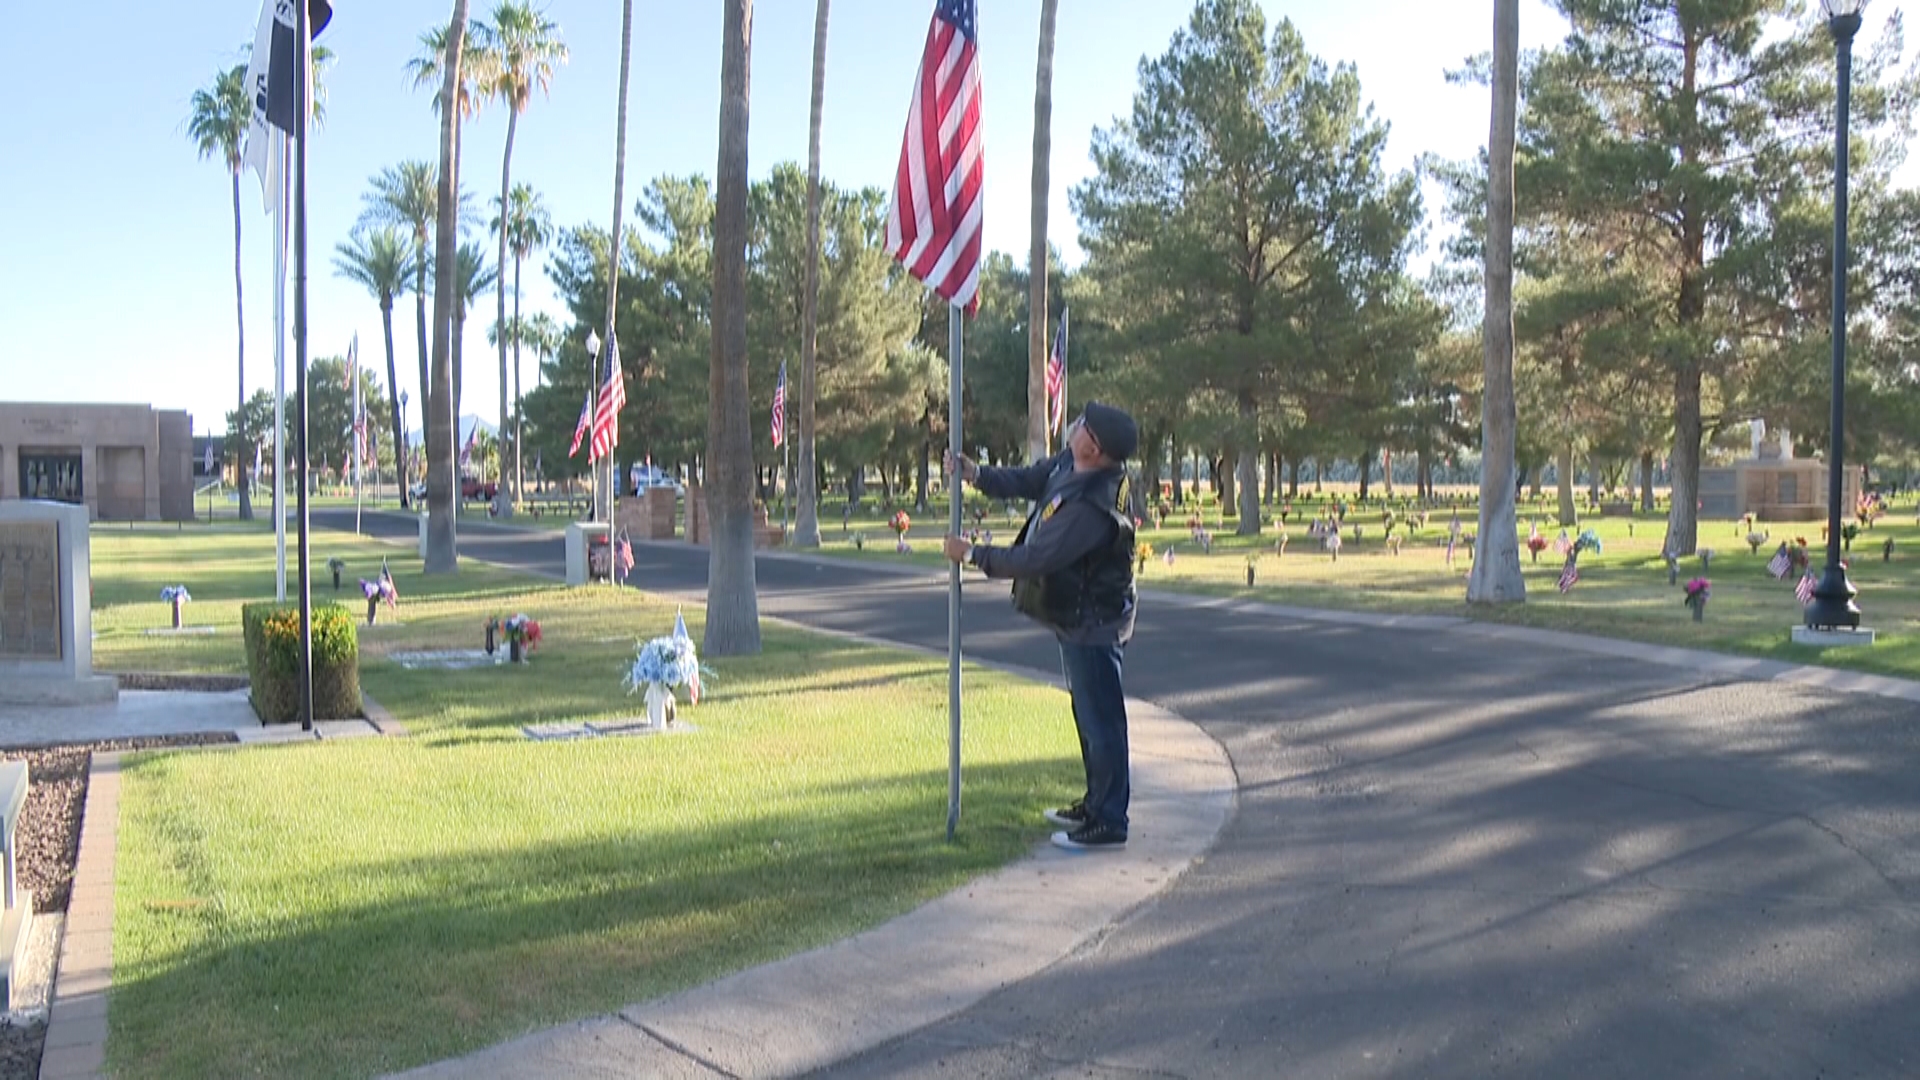 A group of veterans and Scouts came together at Mountain View Cemetery in Mesa to plan flags on the graves of veterans in honor of Memorial Day.